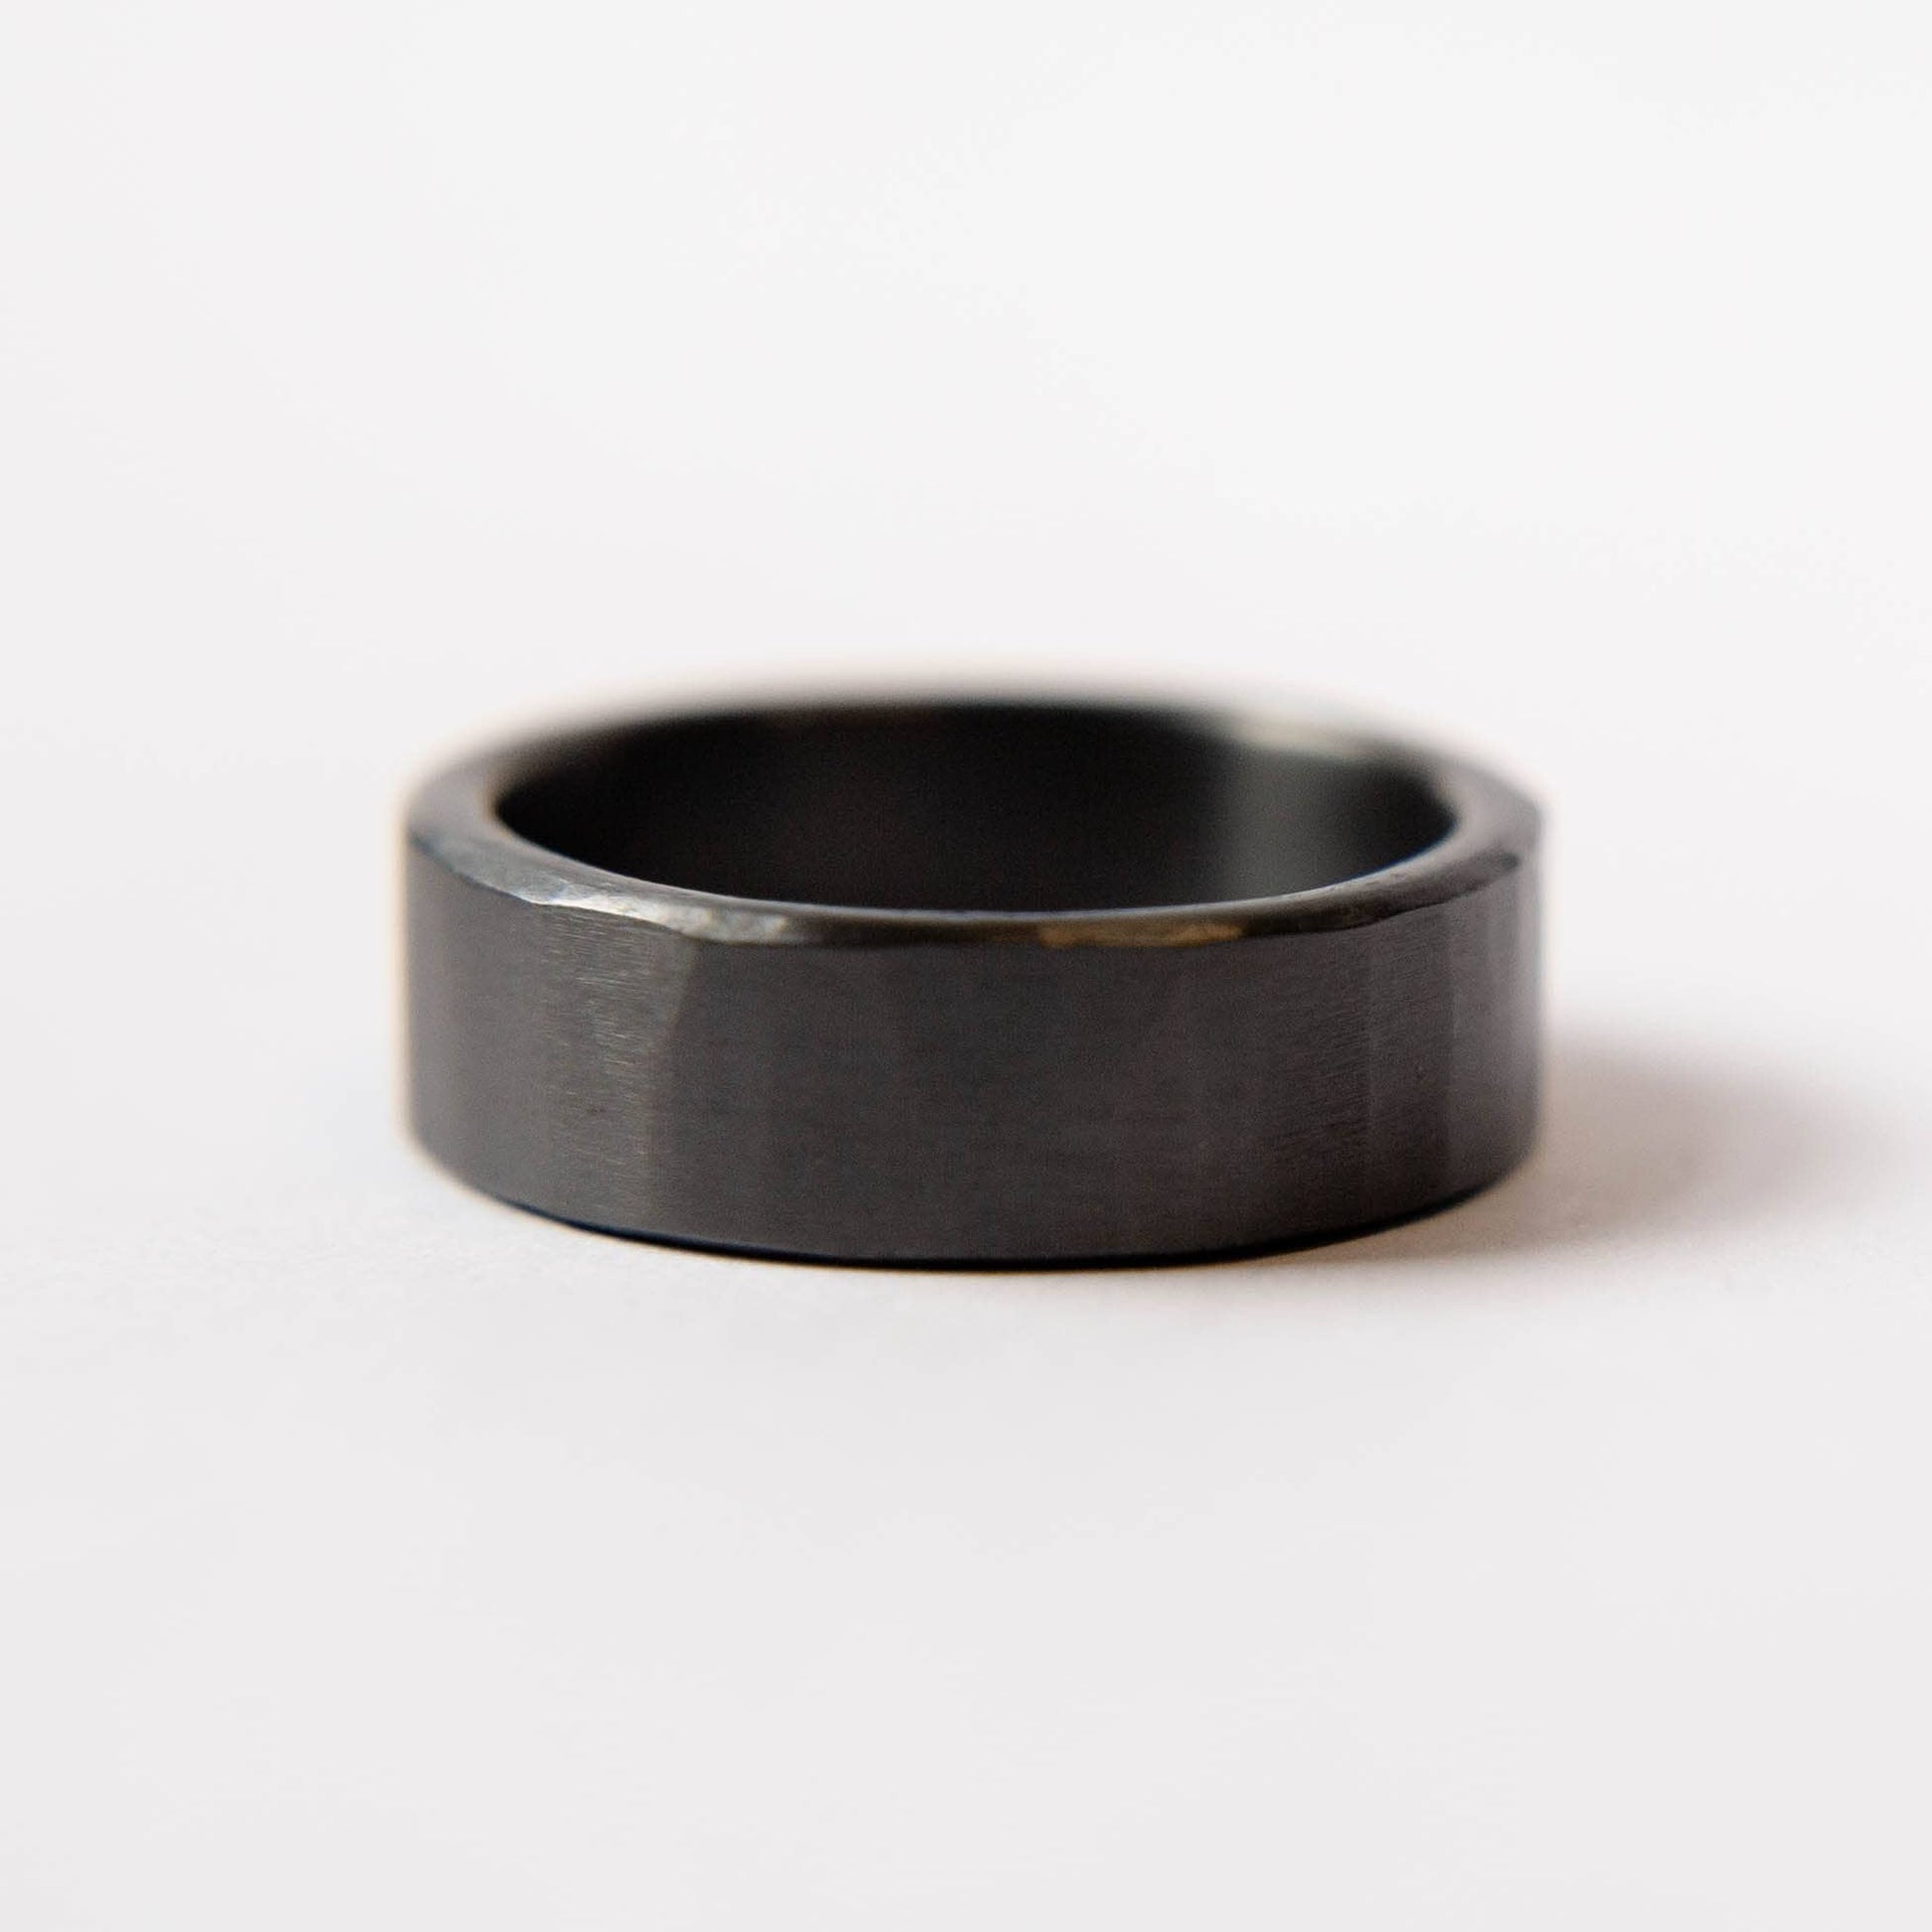 Mens black wedding band. This photo shows a lightly faceted black zirconium ring. (Horizontal with white background)